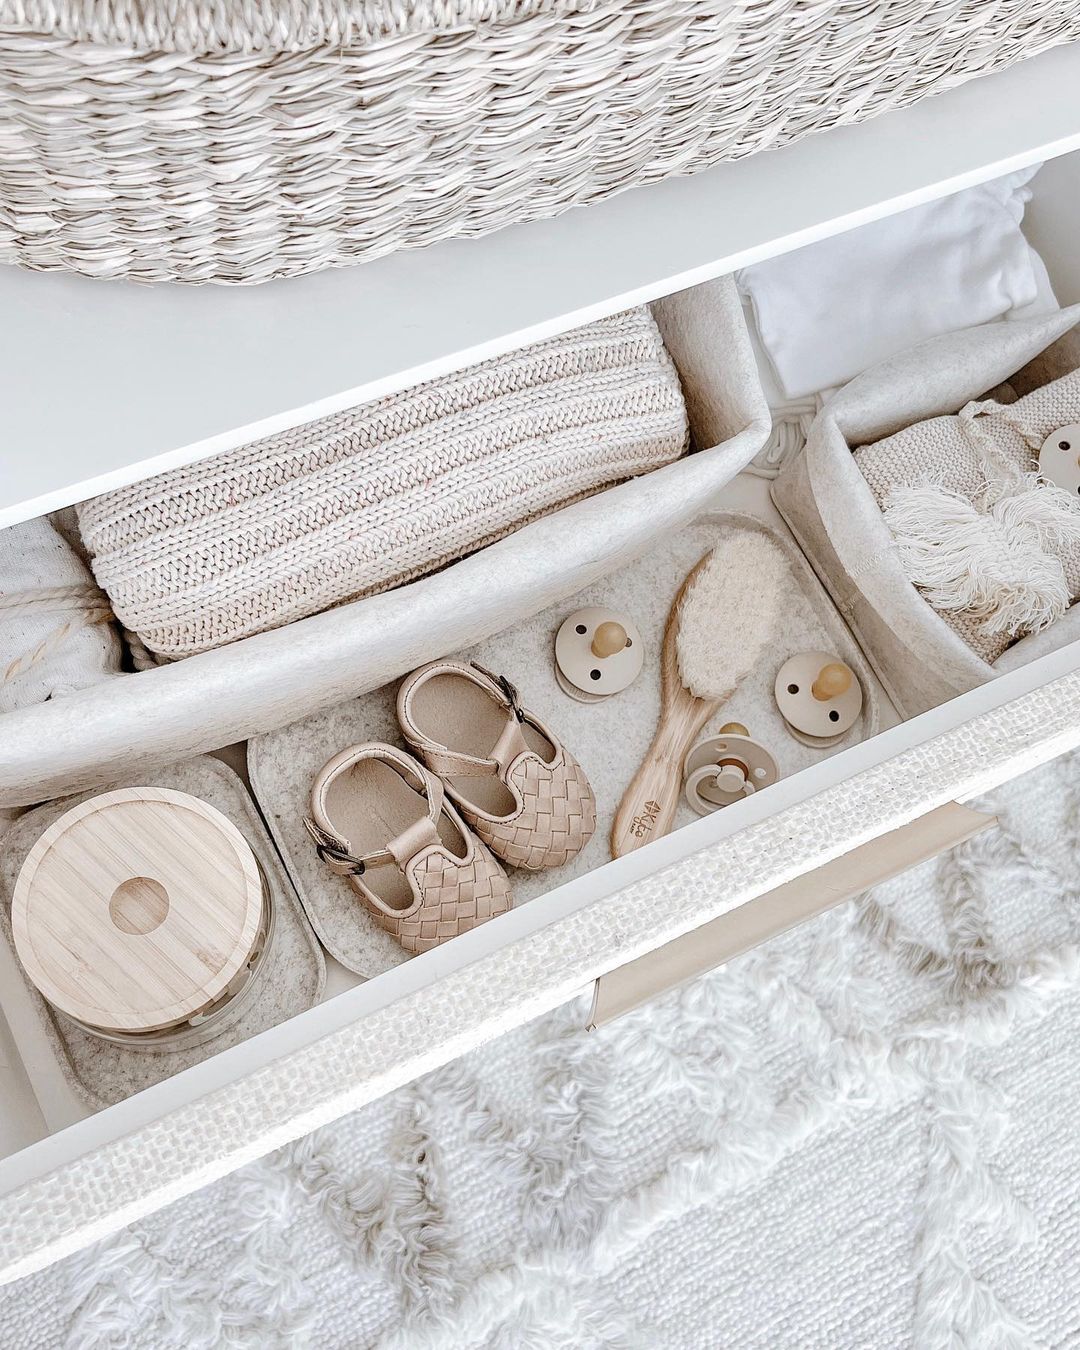 Drawer with baby items in drawer organizers. Photo by Instagram user @mytruthstory.